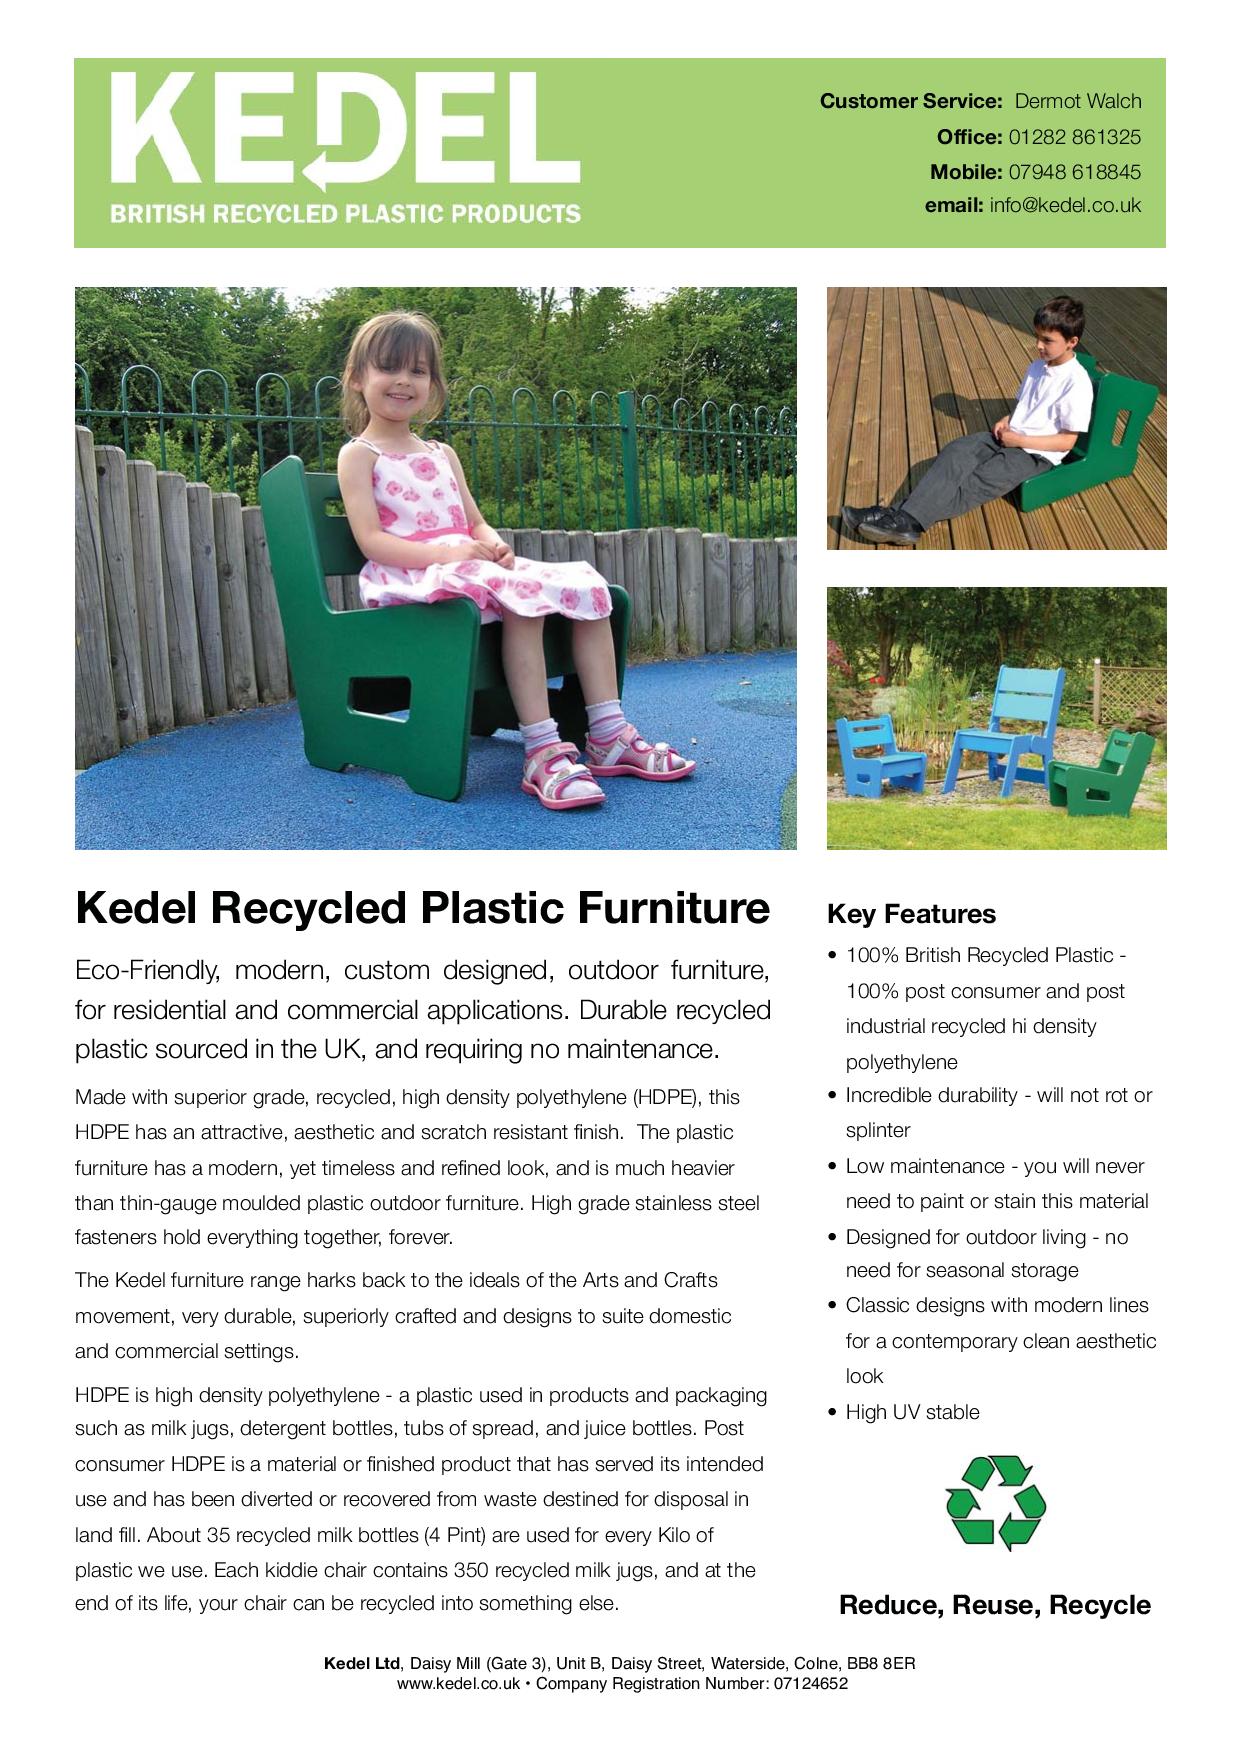 Recycled Plastic HDPE Chair - Key Features Leaflet